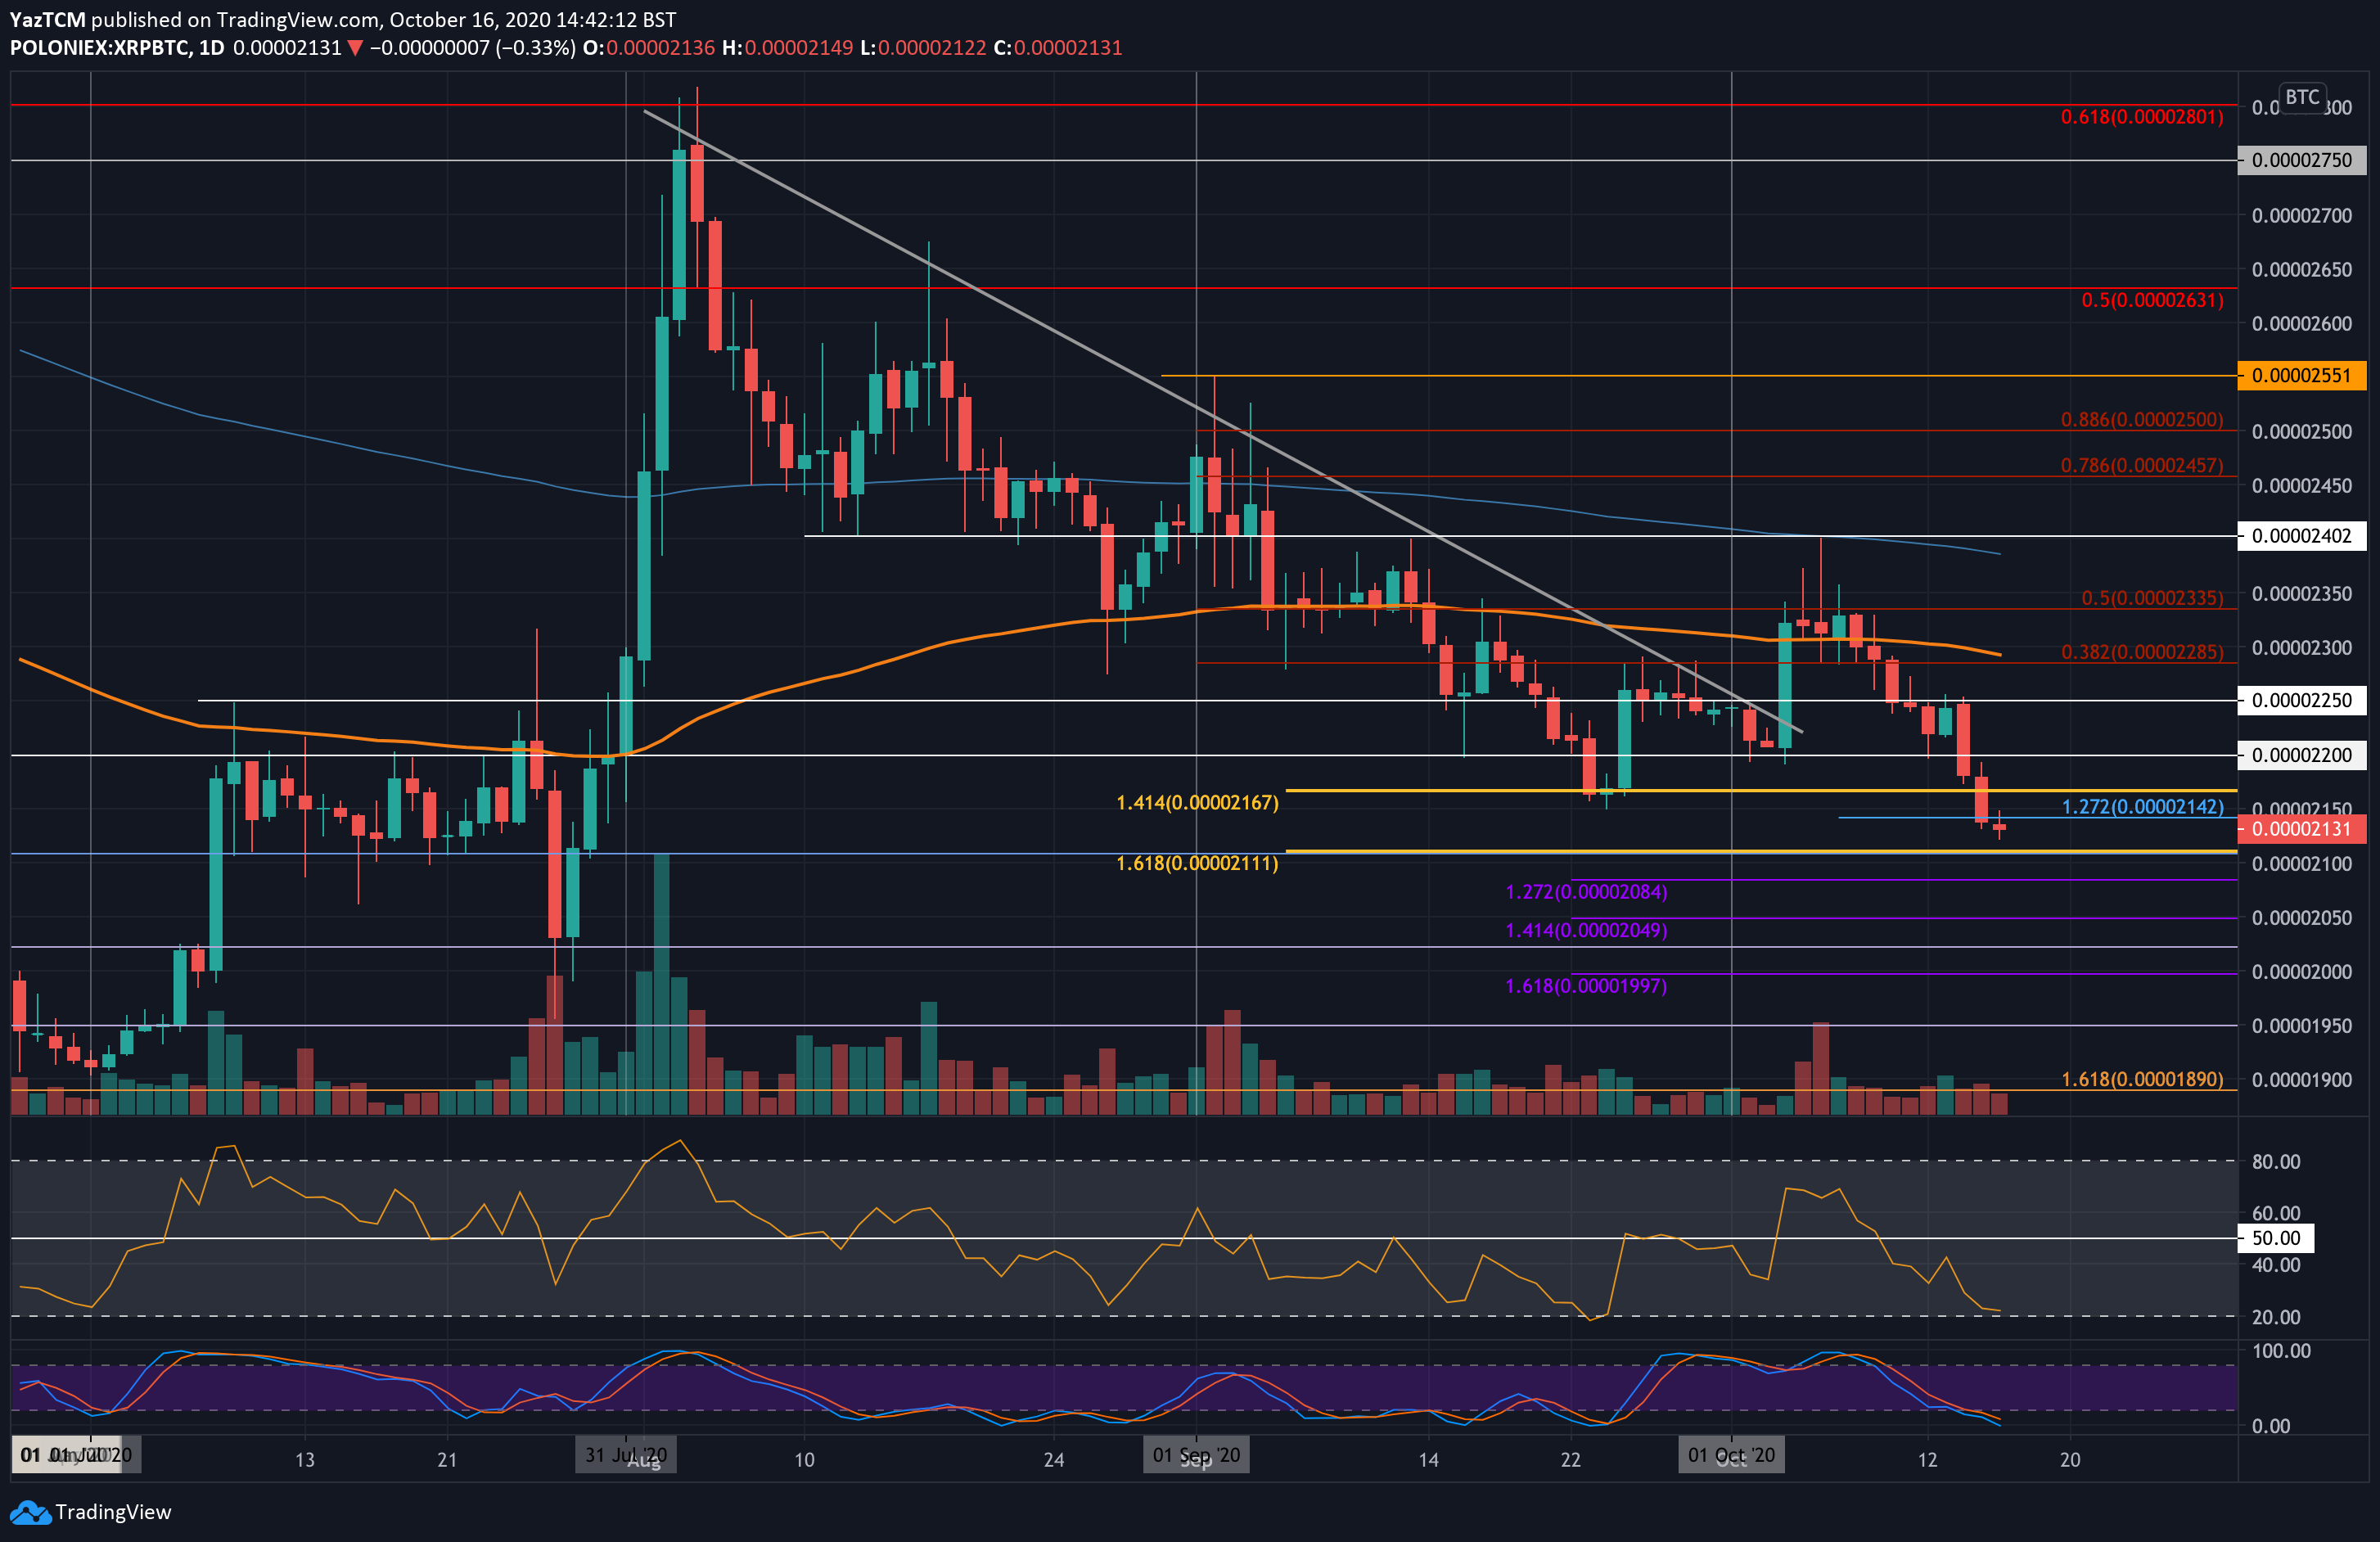 Crypto Price Analysis & Overview October 16th: Bitcoin, Ethereum, Ripple, Waves, and Ren